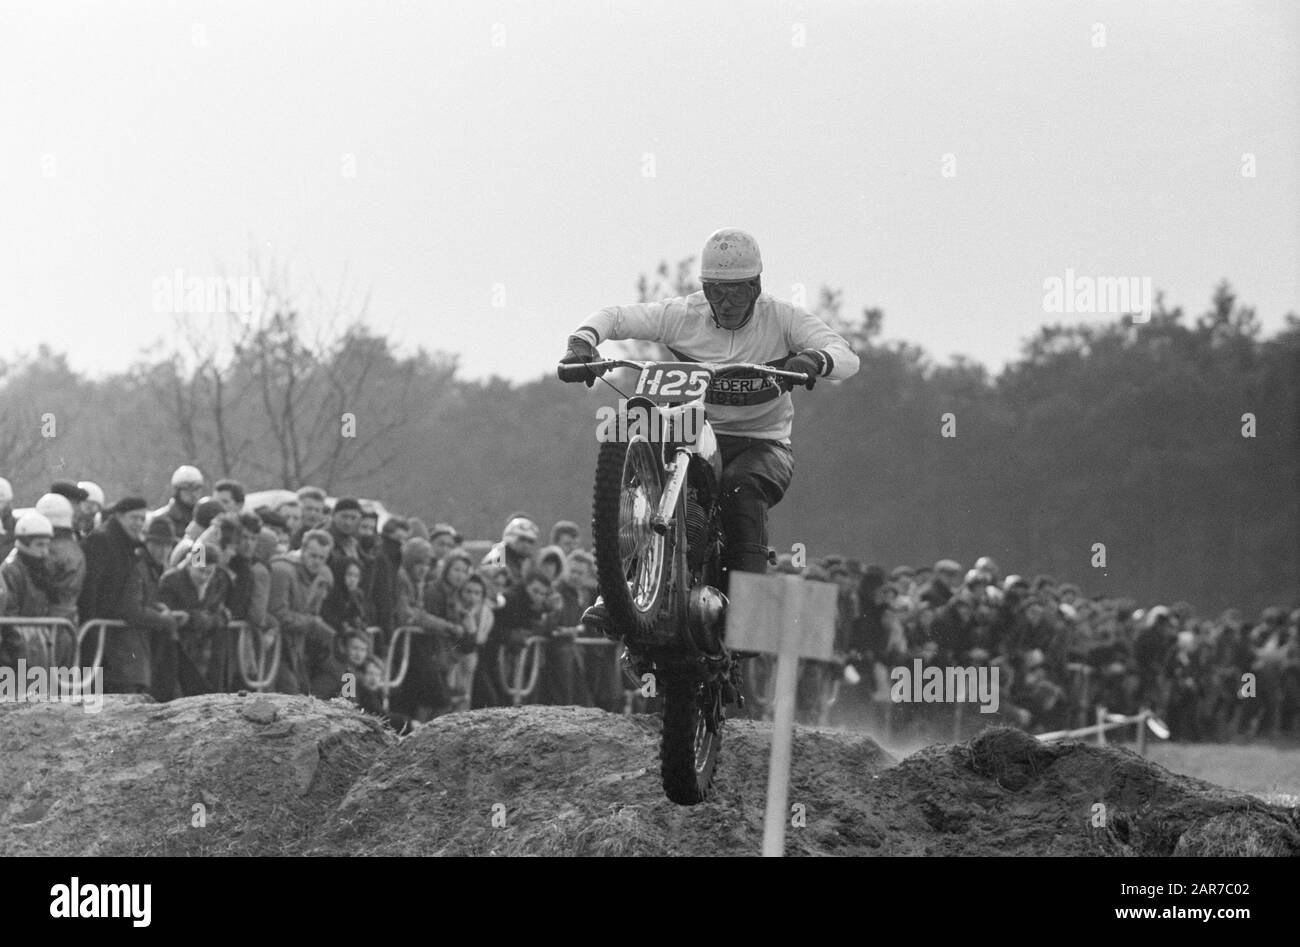 Opening Motorcross season and country match Netherlands against Belgium,  Rob Selling (number 14), Van Ham (number 32) Date: February 24, 1962  Keywords: MOTOCROSS, Openings Personal name: Selling, Rob Stock Photo -  Alamy